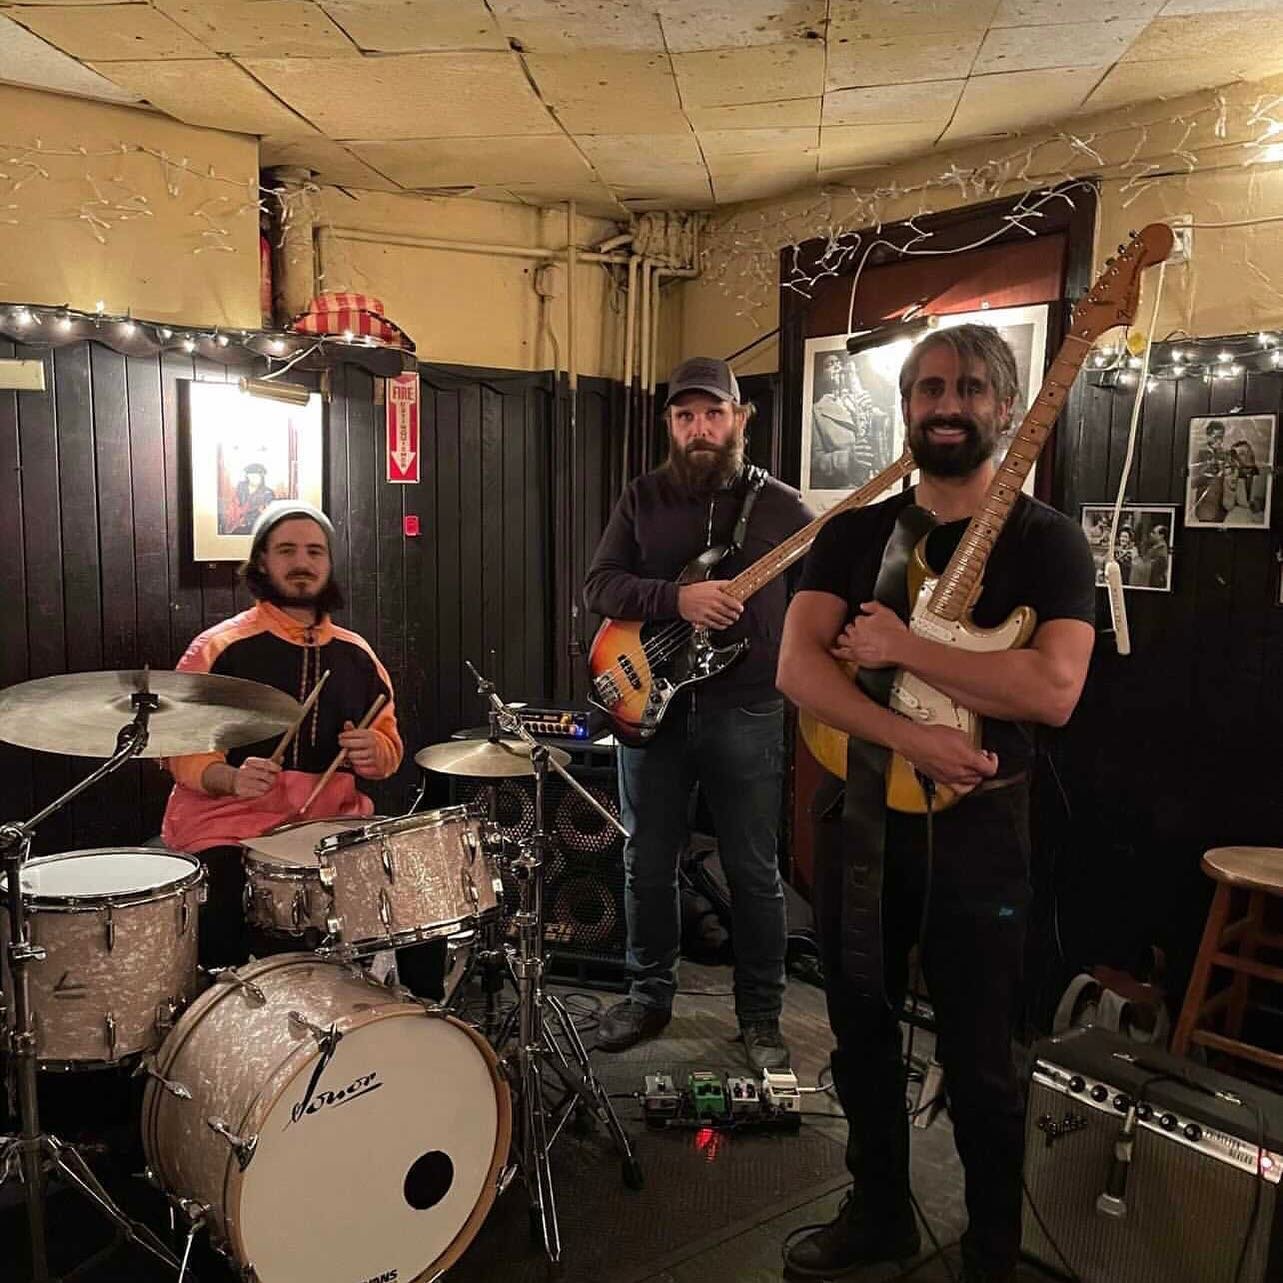 Tonight! 6-8p We have Bouje Trio! They are a new collective based in Brooklyn, NYC and comprised of 3 musicians with distinct cultural and musical backgrounds. 
Coming together to find common ground under the umbrella of Jazz and contemporary improvi